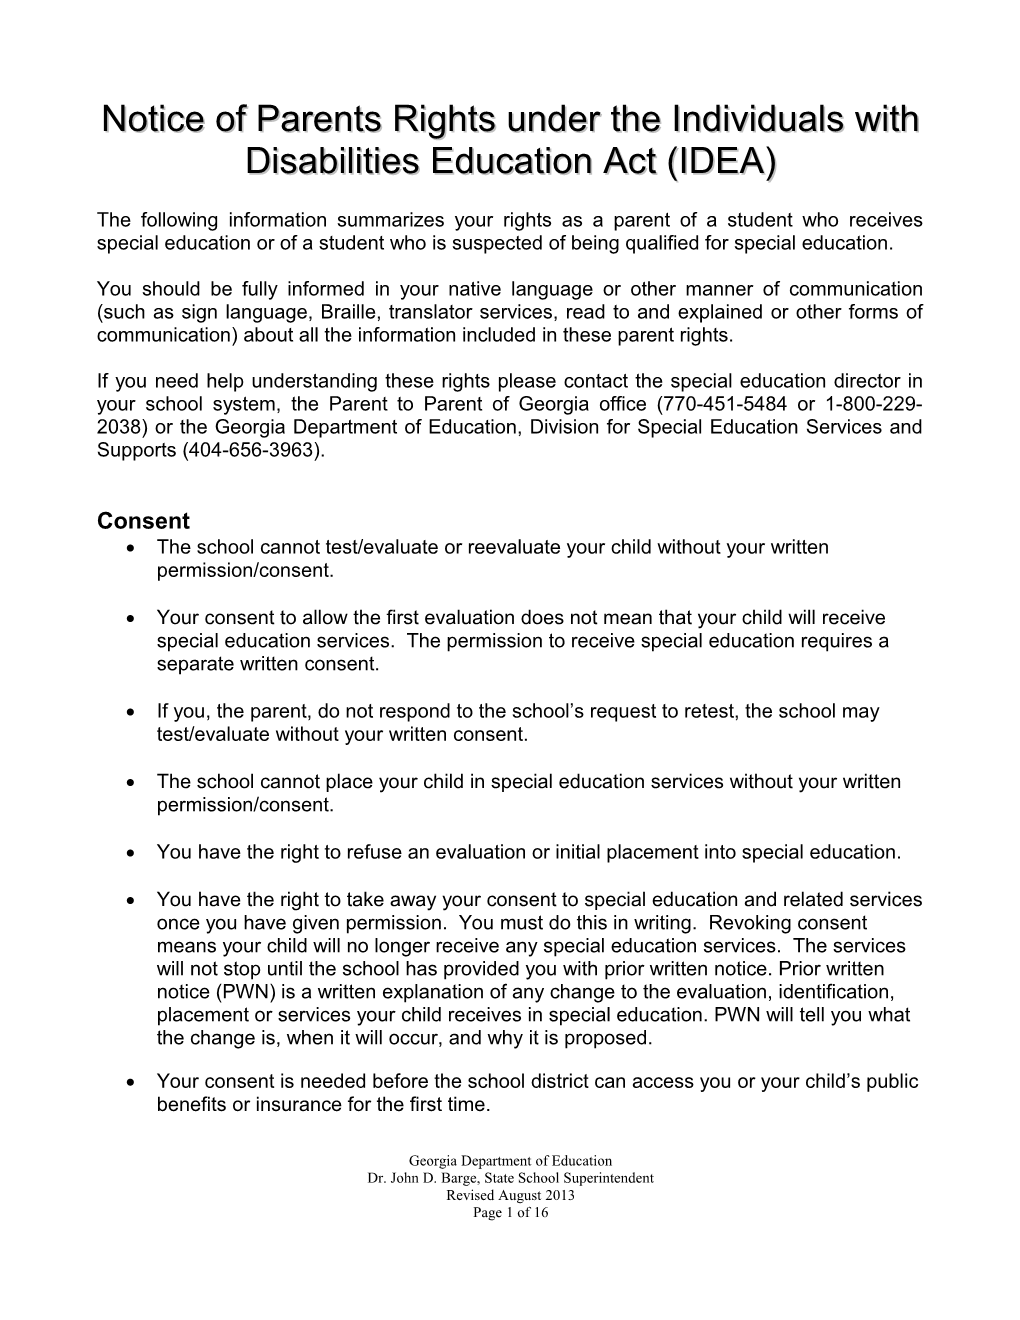 Notice of Parents Rights Under the Individuals with Disabilities Education Act (IDEA)